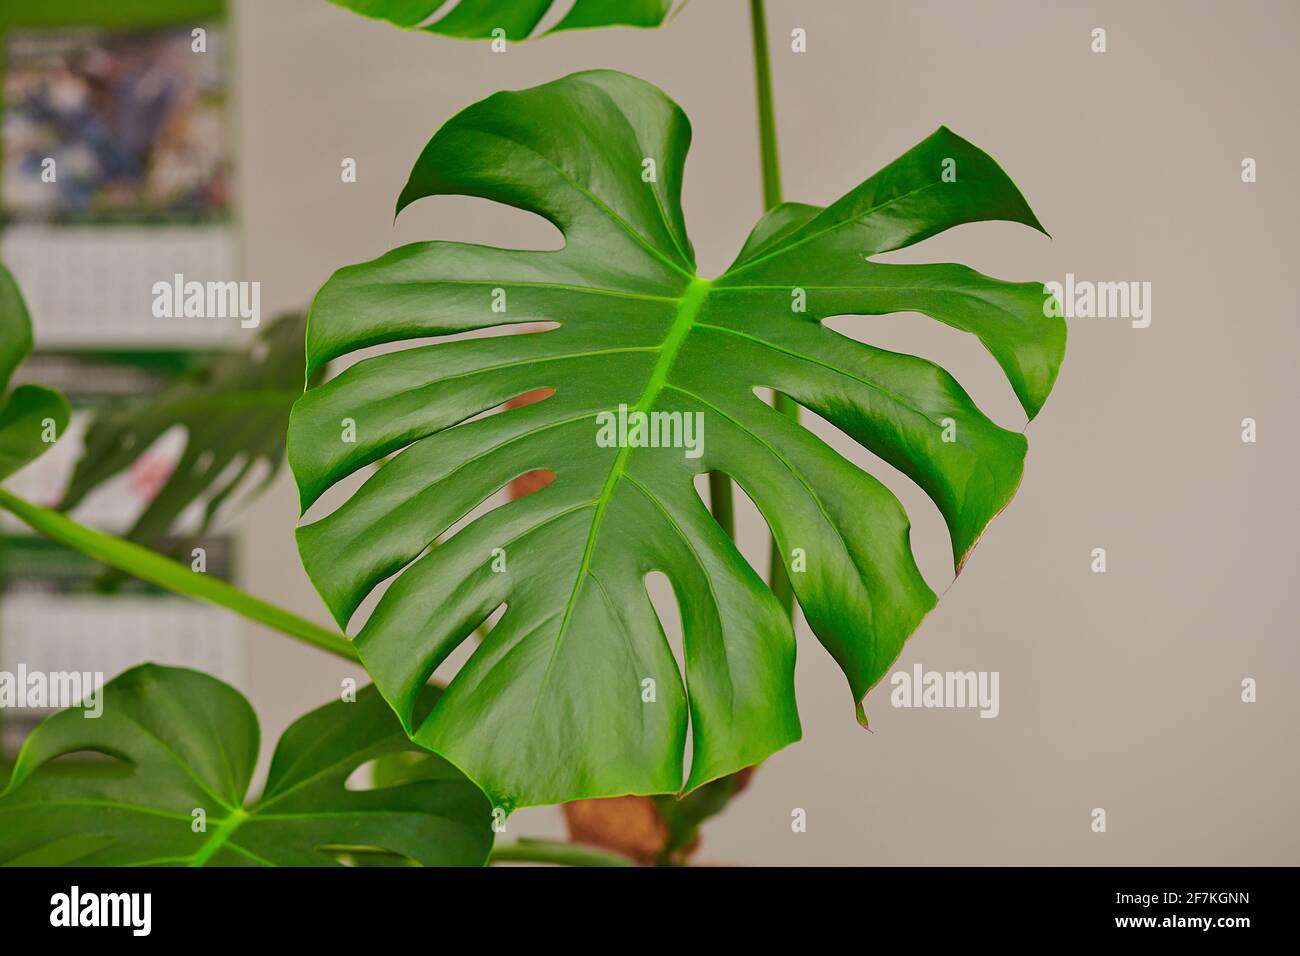 Money Plant Living Room High Resolution Stock Photography and Images - Alamy